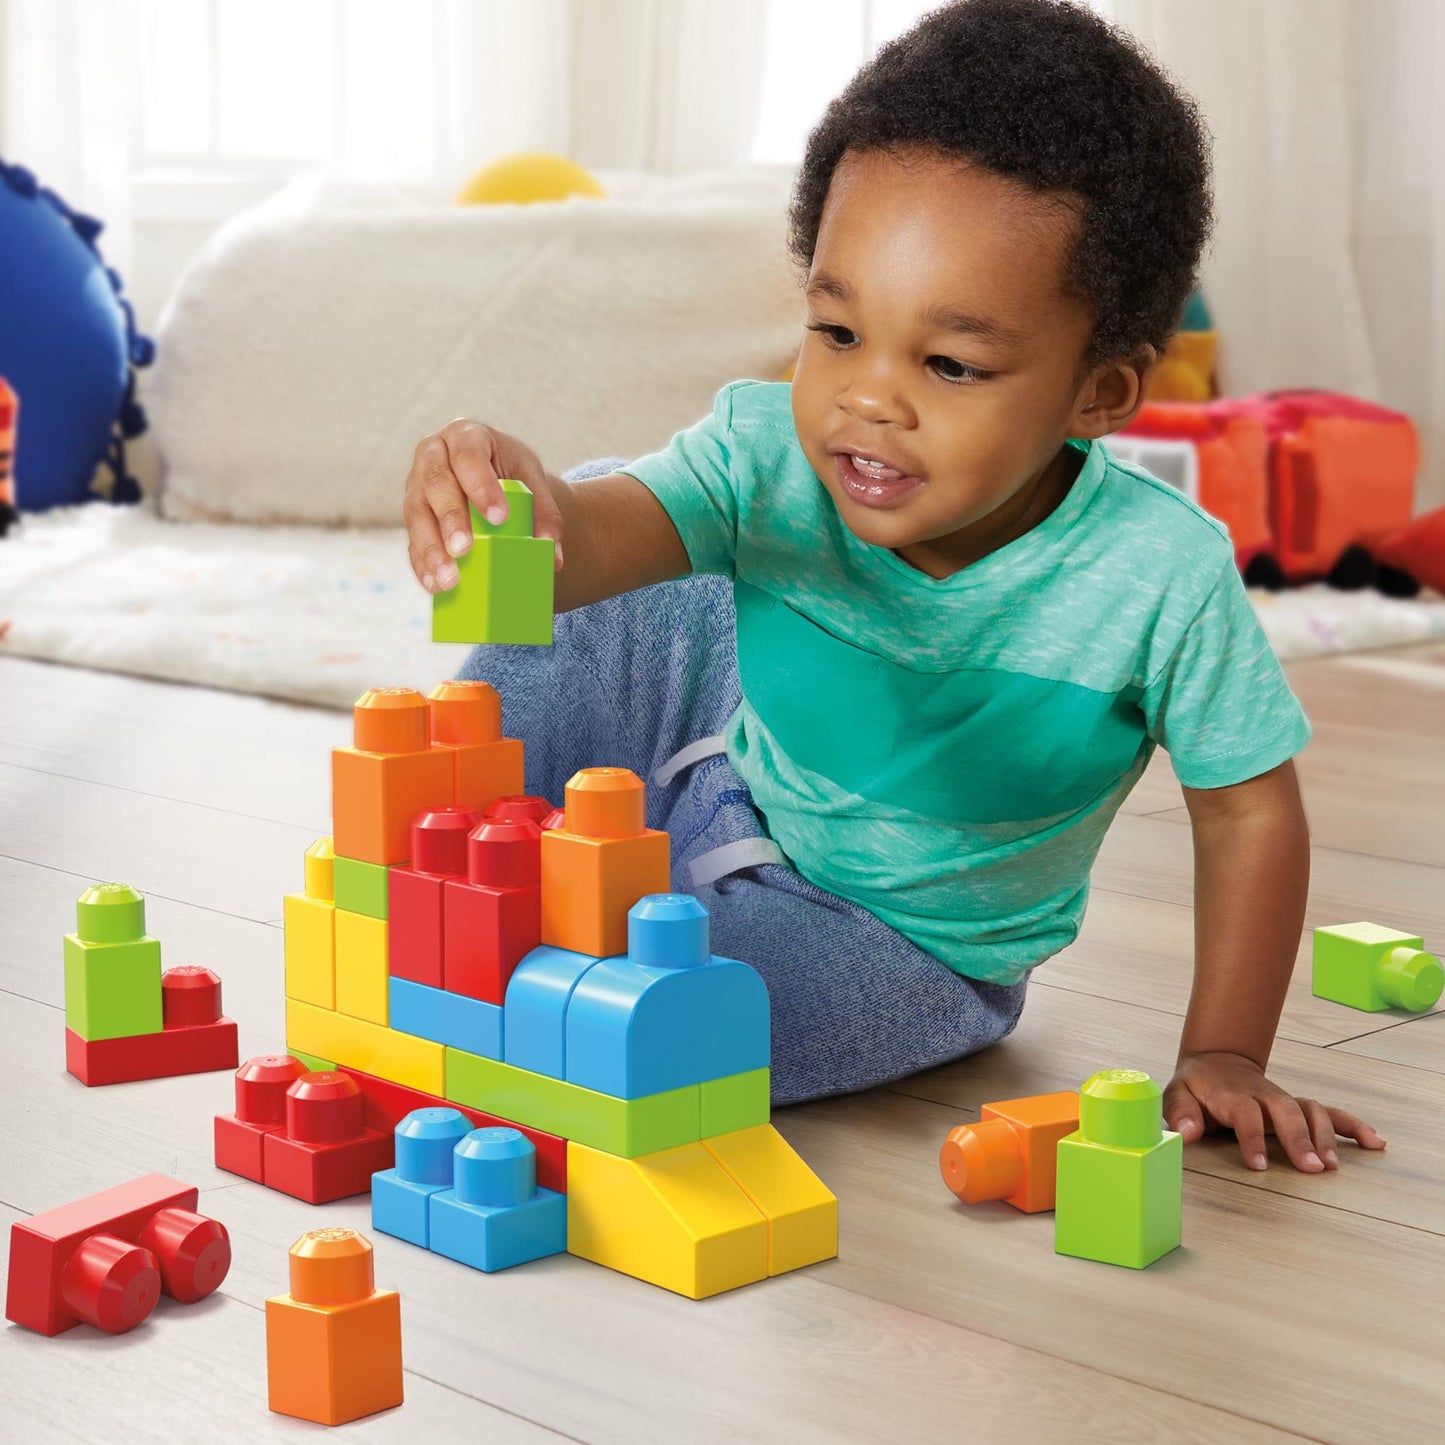 Mega Bloks Let's Build! Construction Toy for 1 Year Old and Up